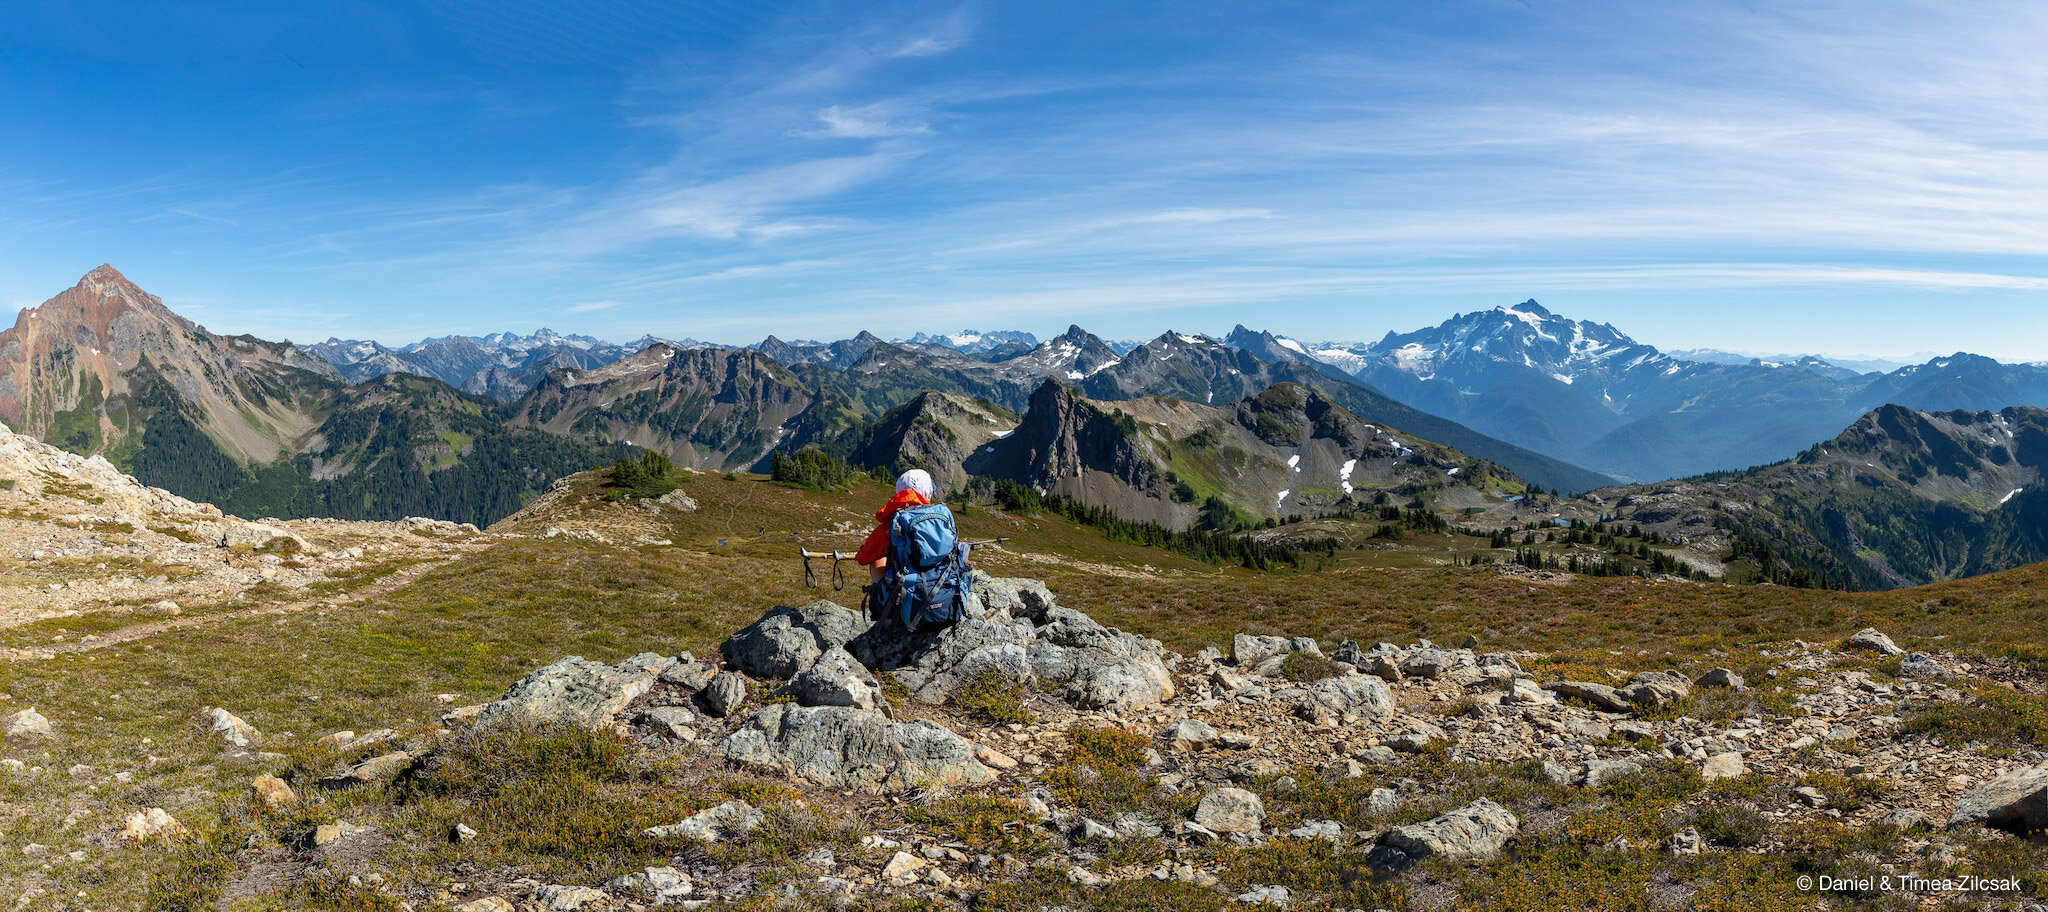 Panoramic view from Mount Larrabee to the left all the way to Mount Shuksan to the right